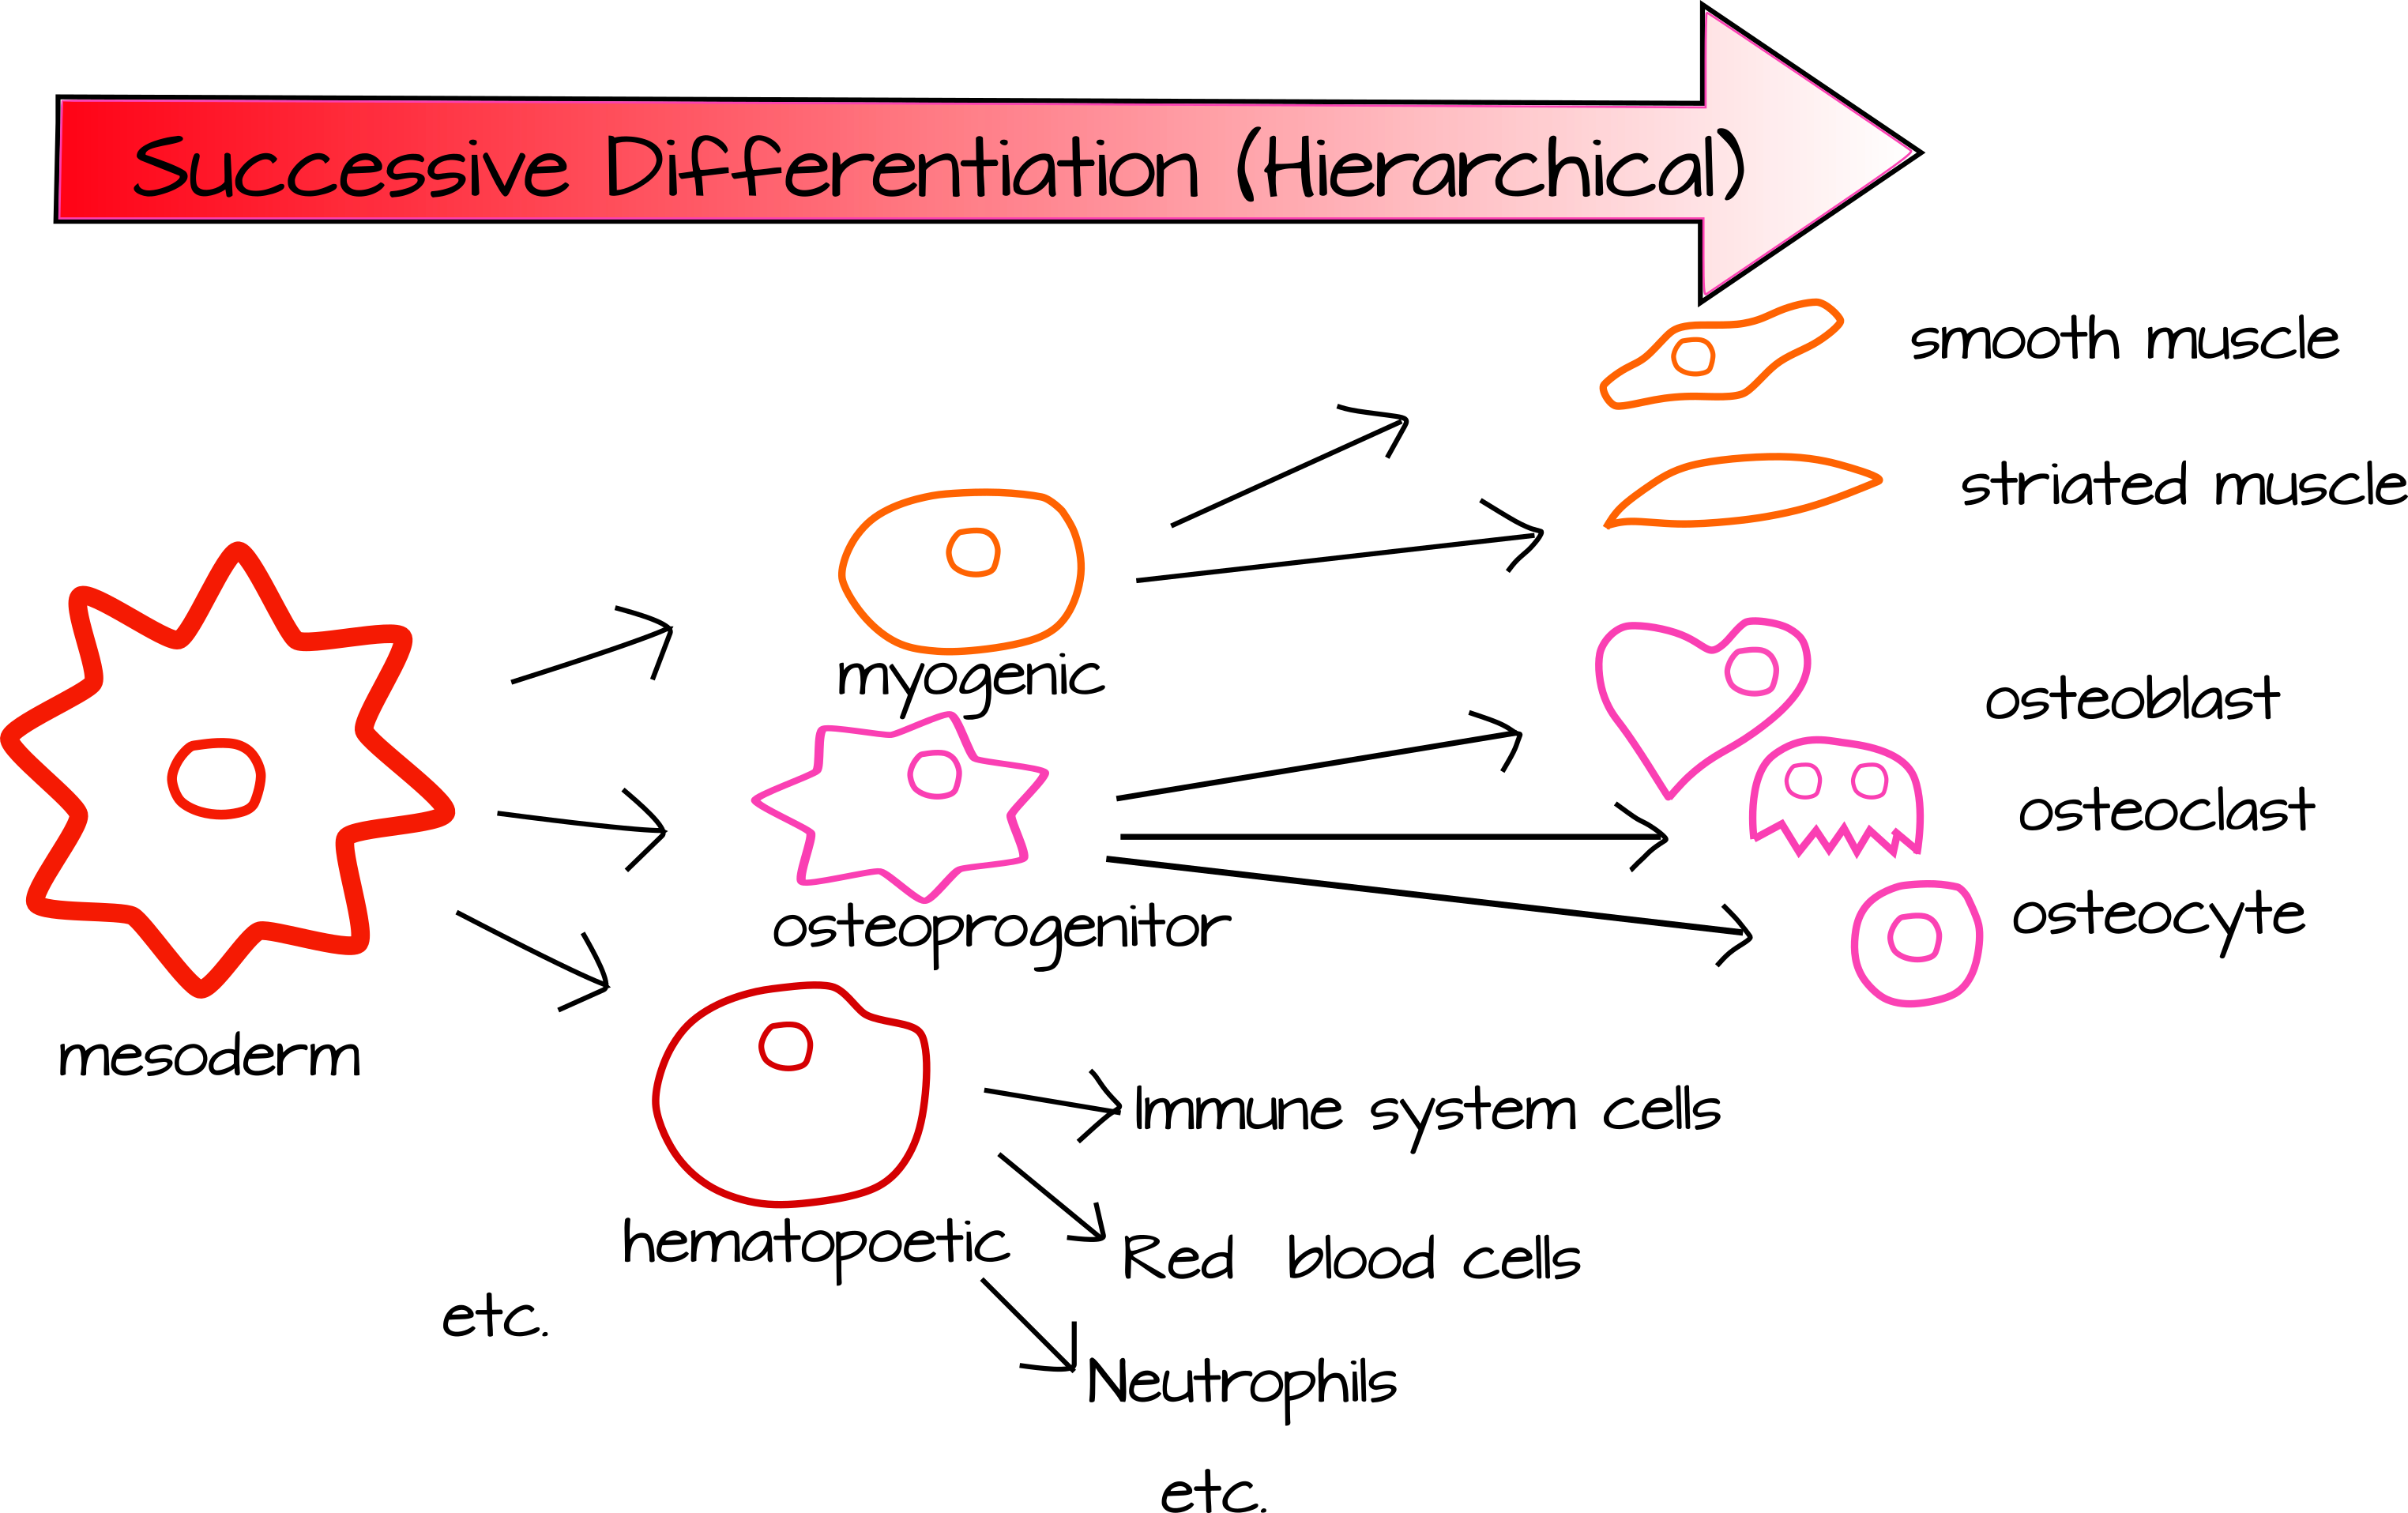 celltypedifferentiation.png